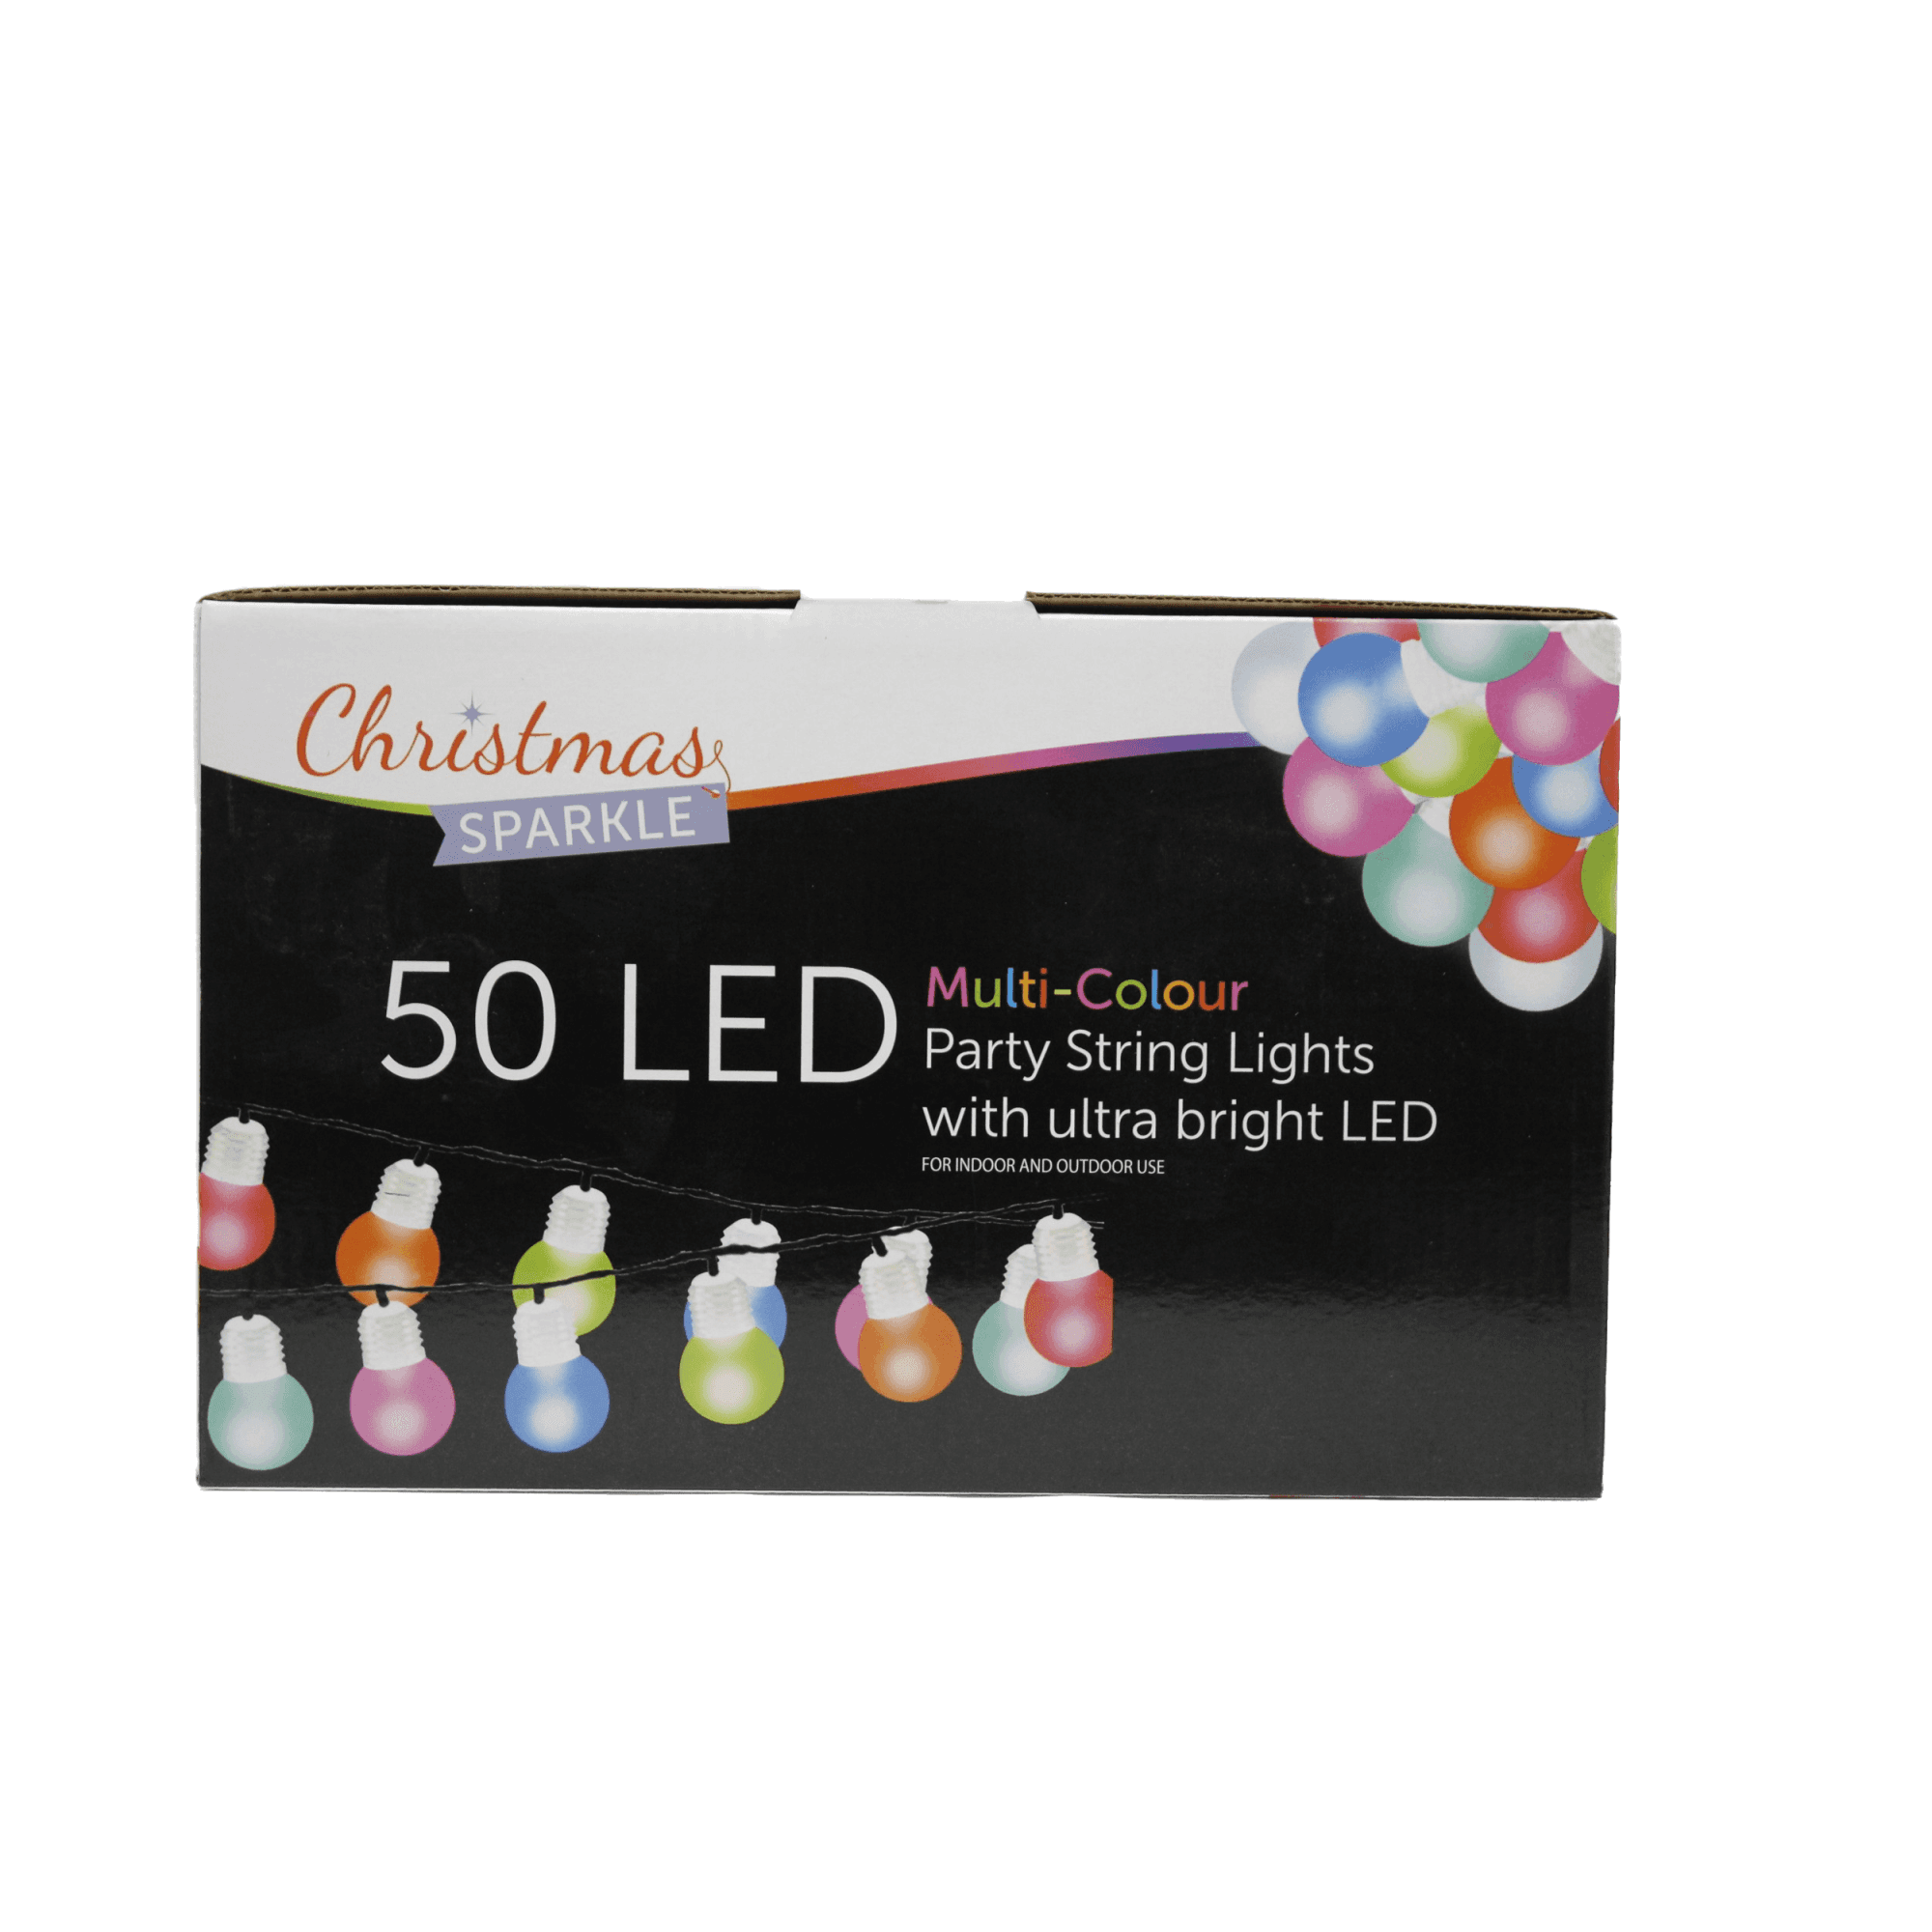 Christmas Sparkle Outdoor and Indoor Party String Bulbs with 50 Ultra bright LEDS in Multi Colour with Green Cable  | TJ Hughes